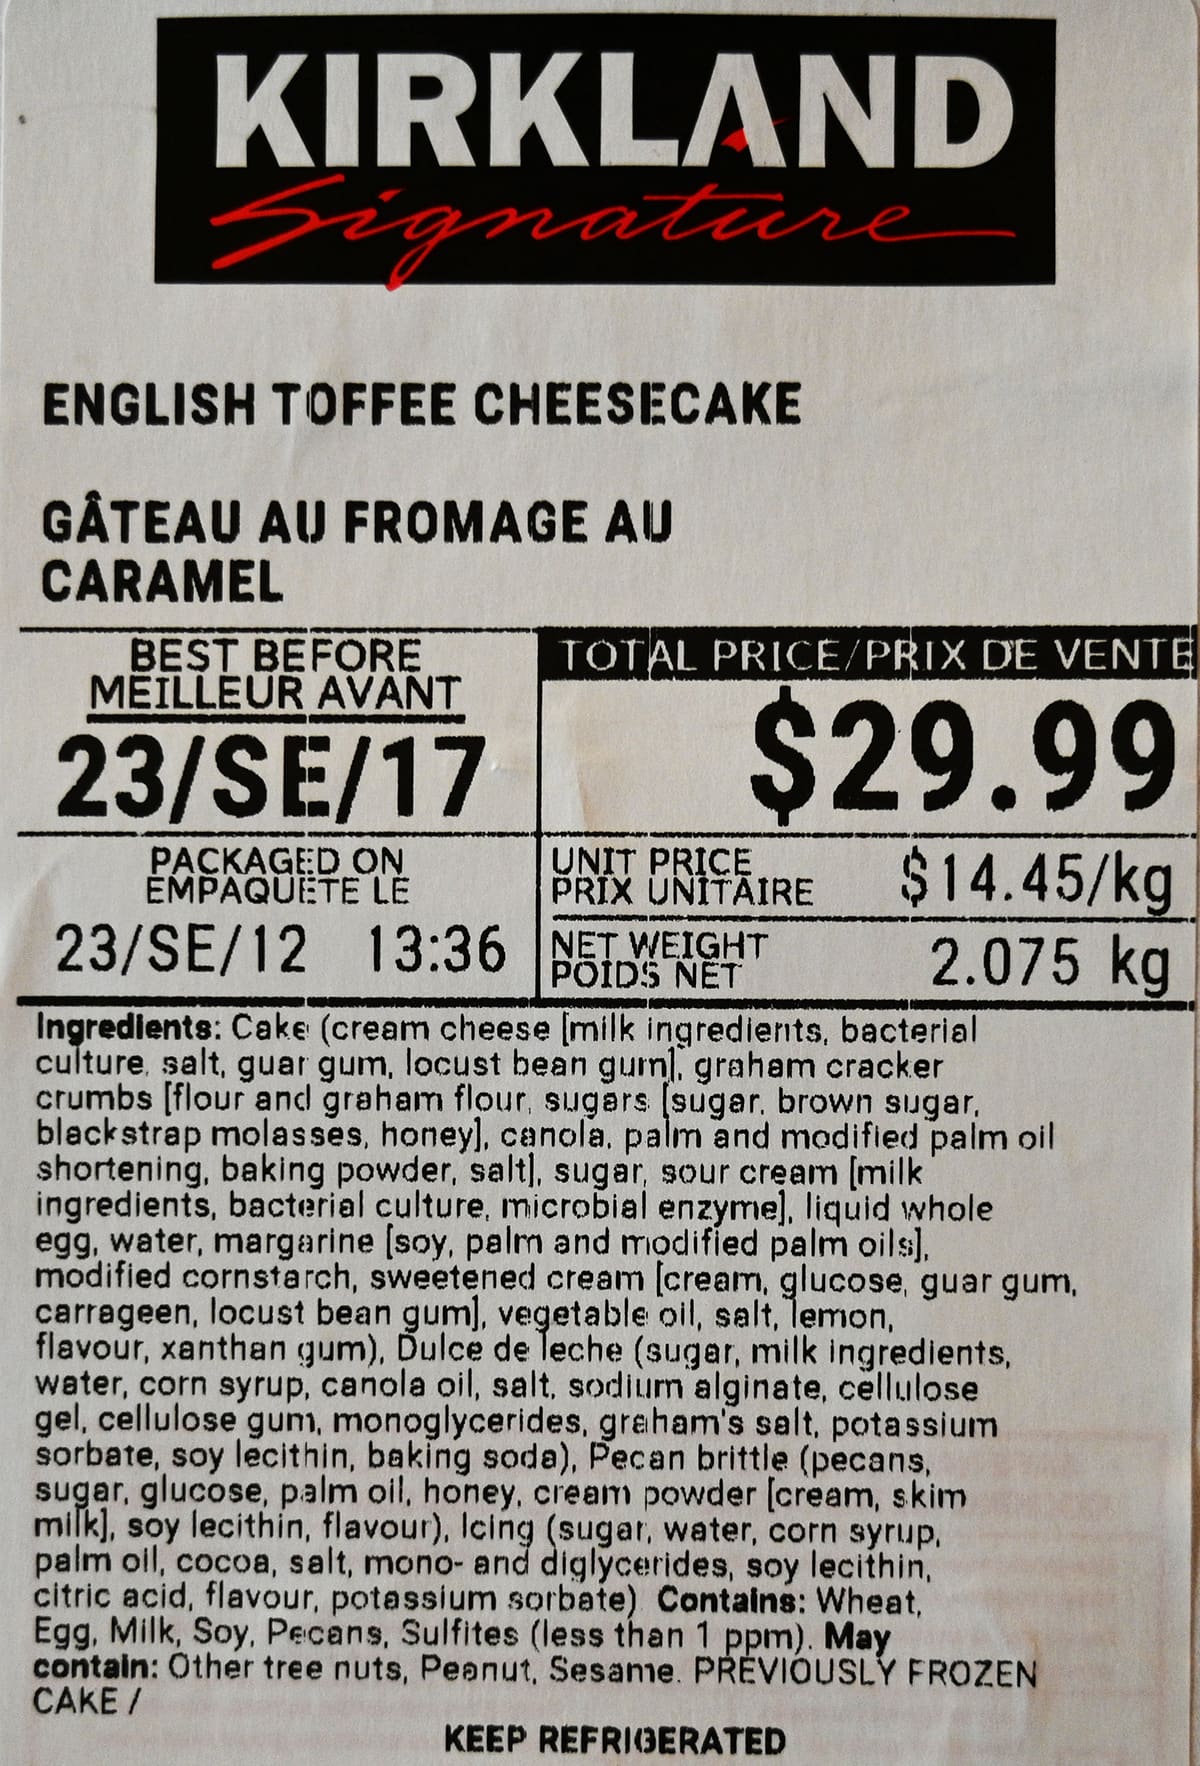 Closeup image of the front label on the cheesecake showing the best before date and cost as well as ingredients,